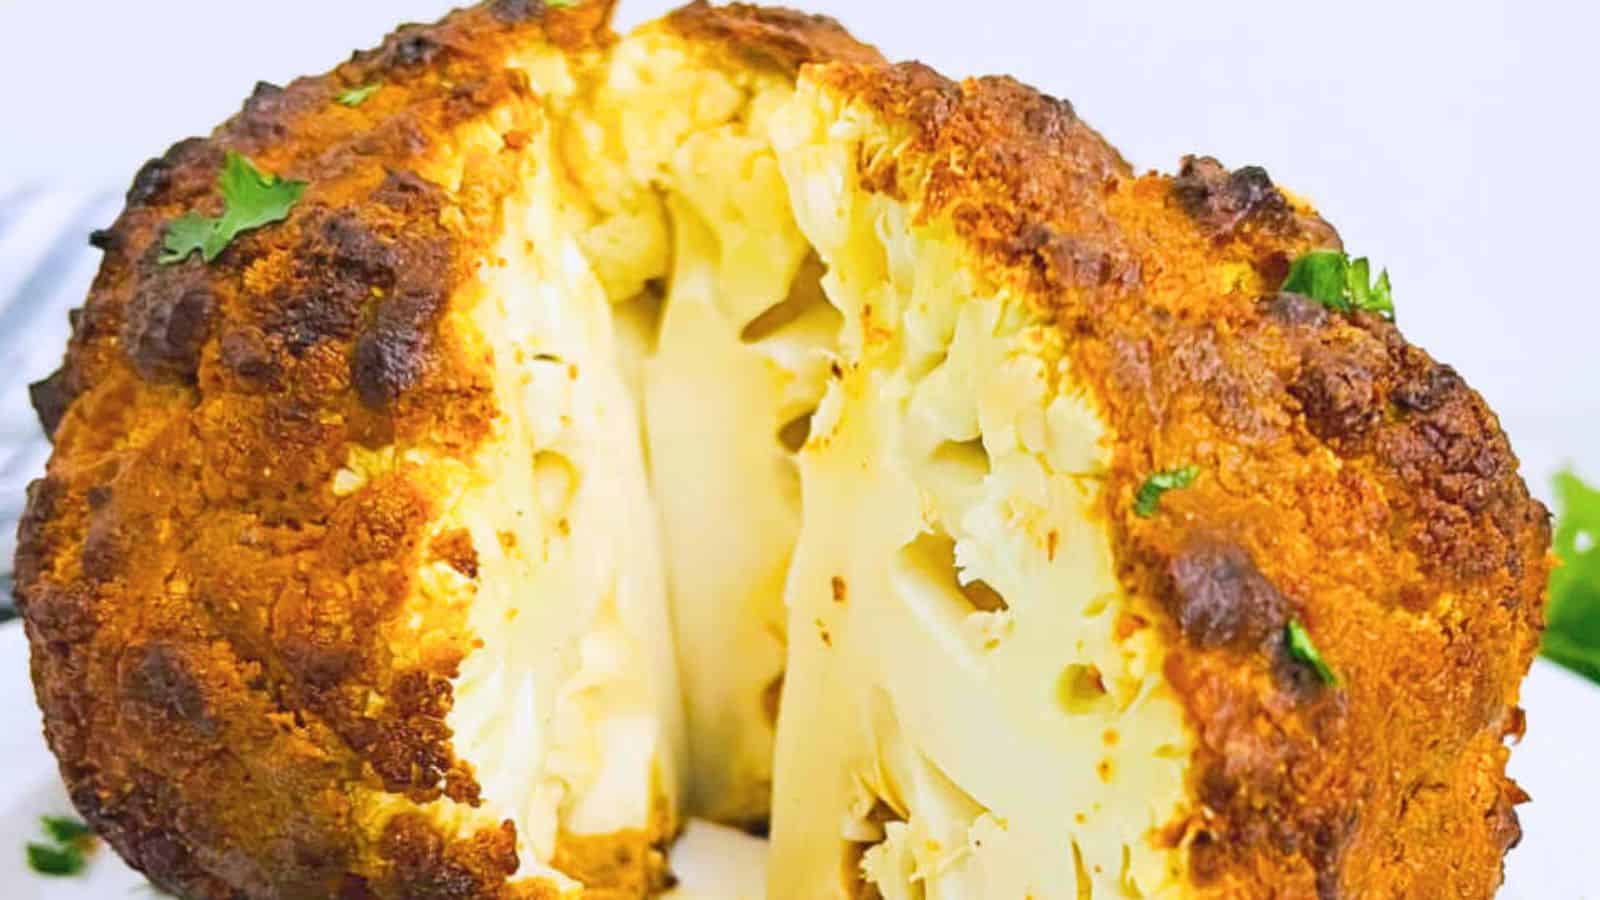 Whole roasted cauliflower with a golden-brown crust, garnished with fresh herbs, displayed up-close.